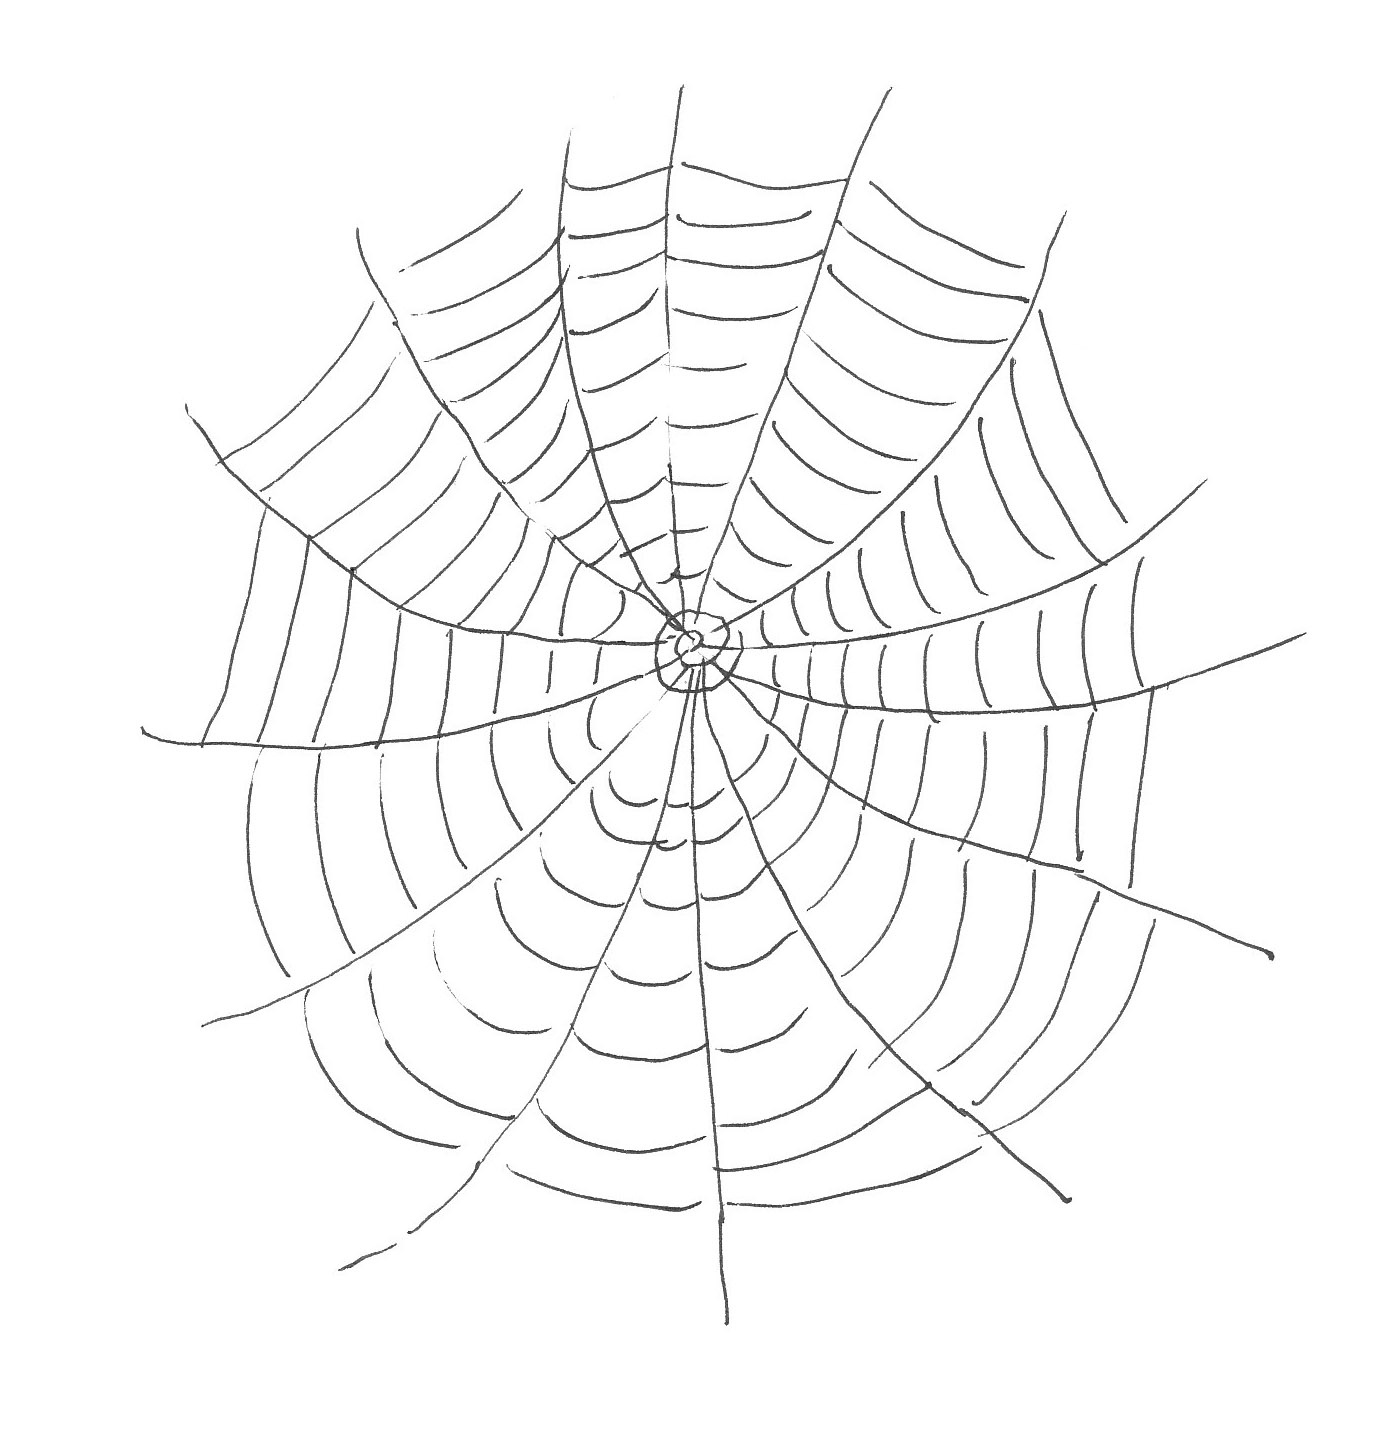 Free Printable Spider Web Coloring Pages For Kids - Spider Web Stencil Free Printable